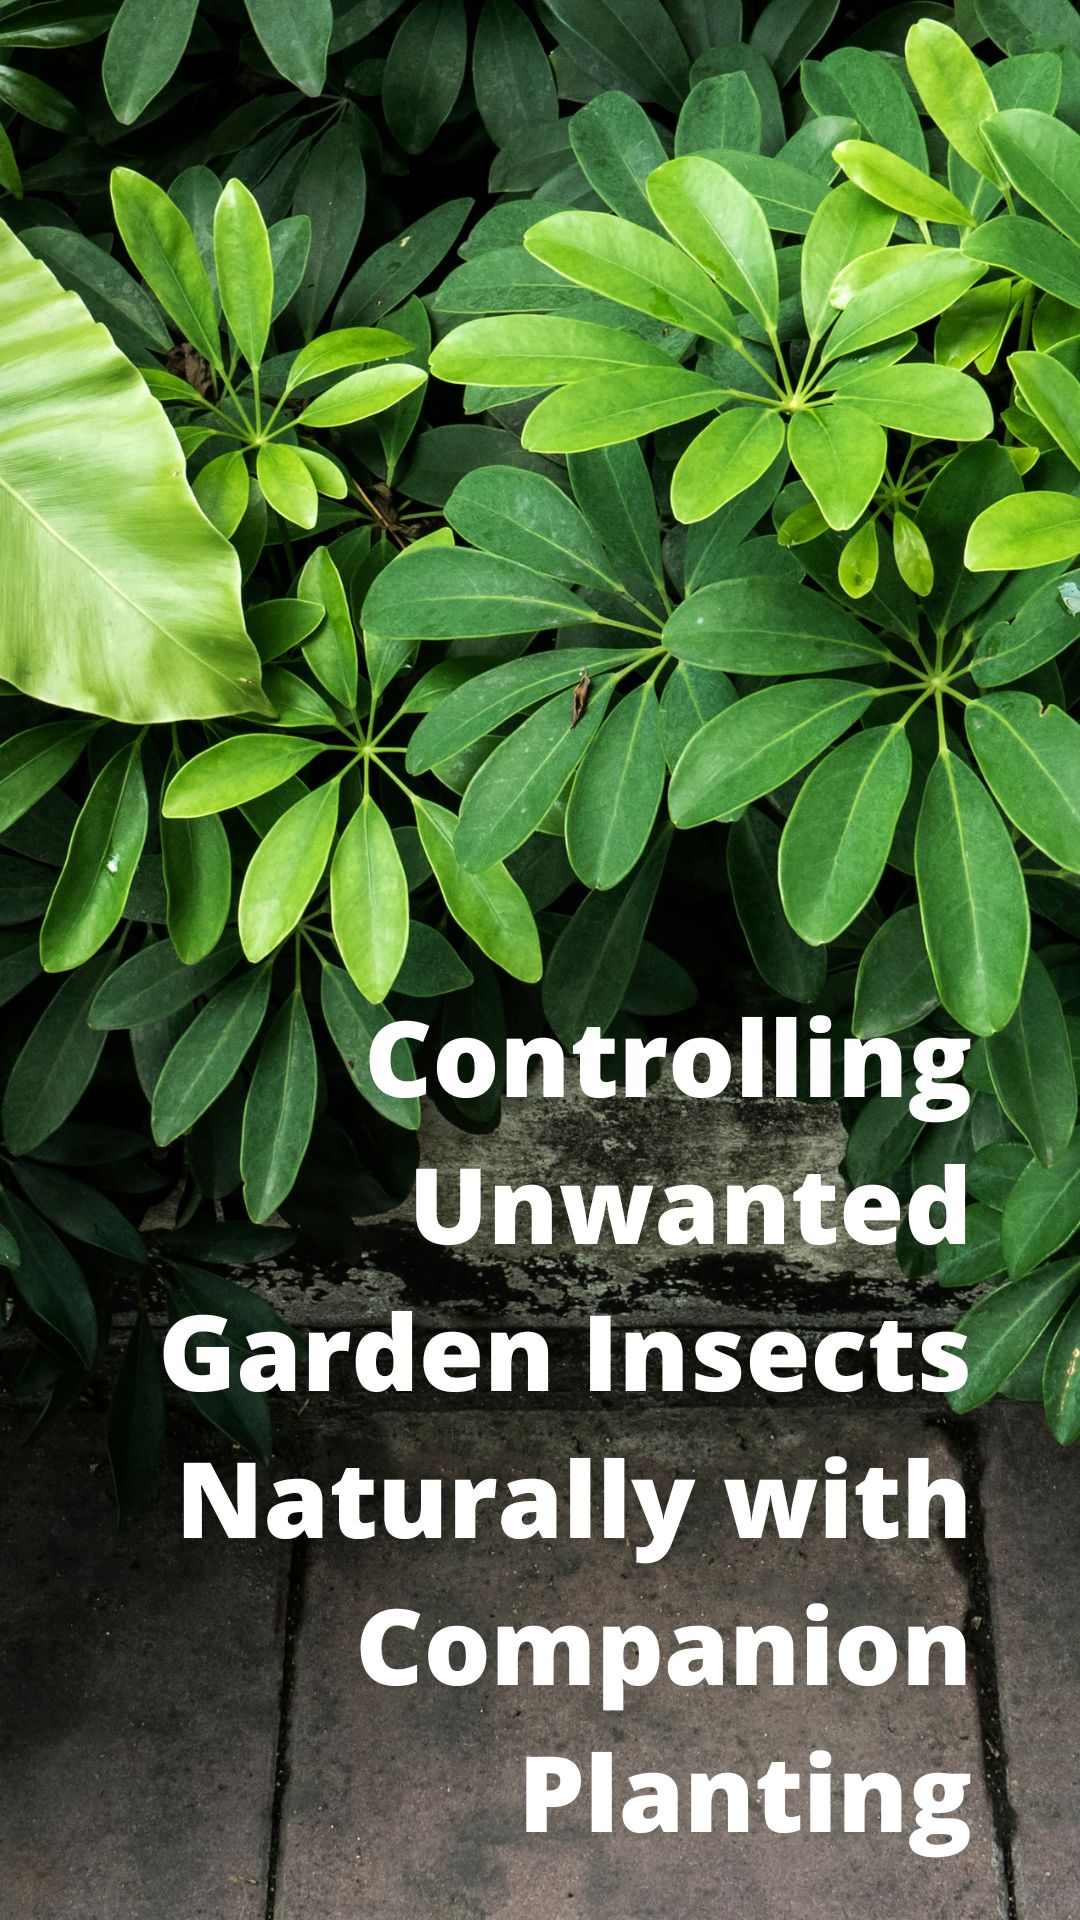 Controlling Unwanted Garden Insects Naturally with Companion Planting